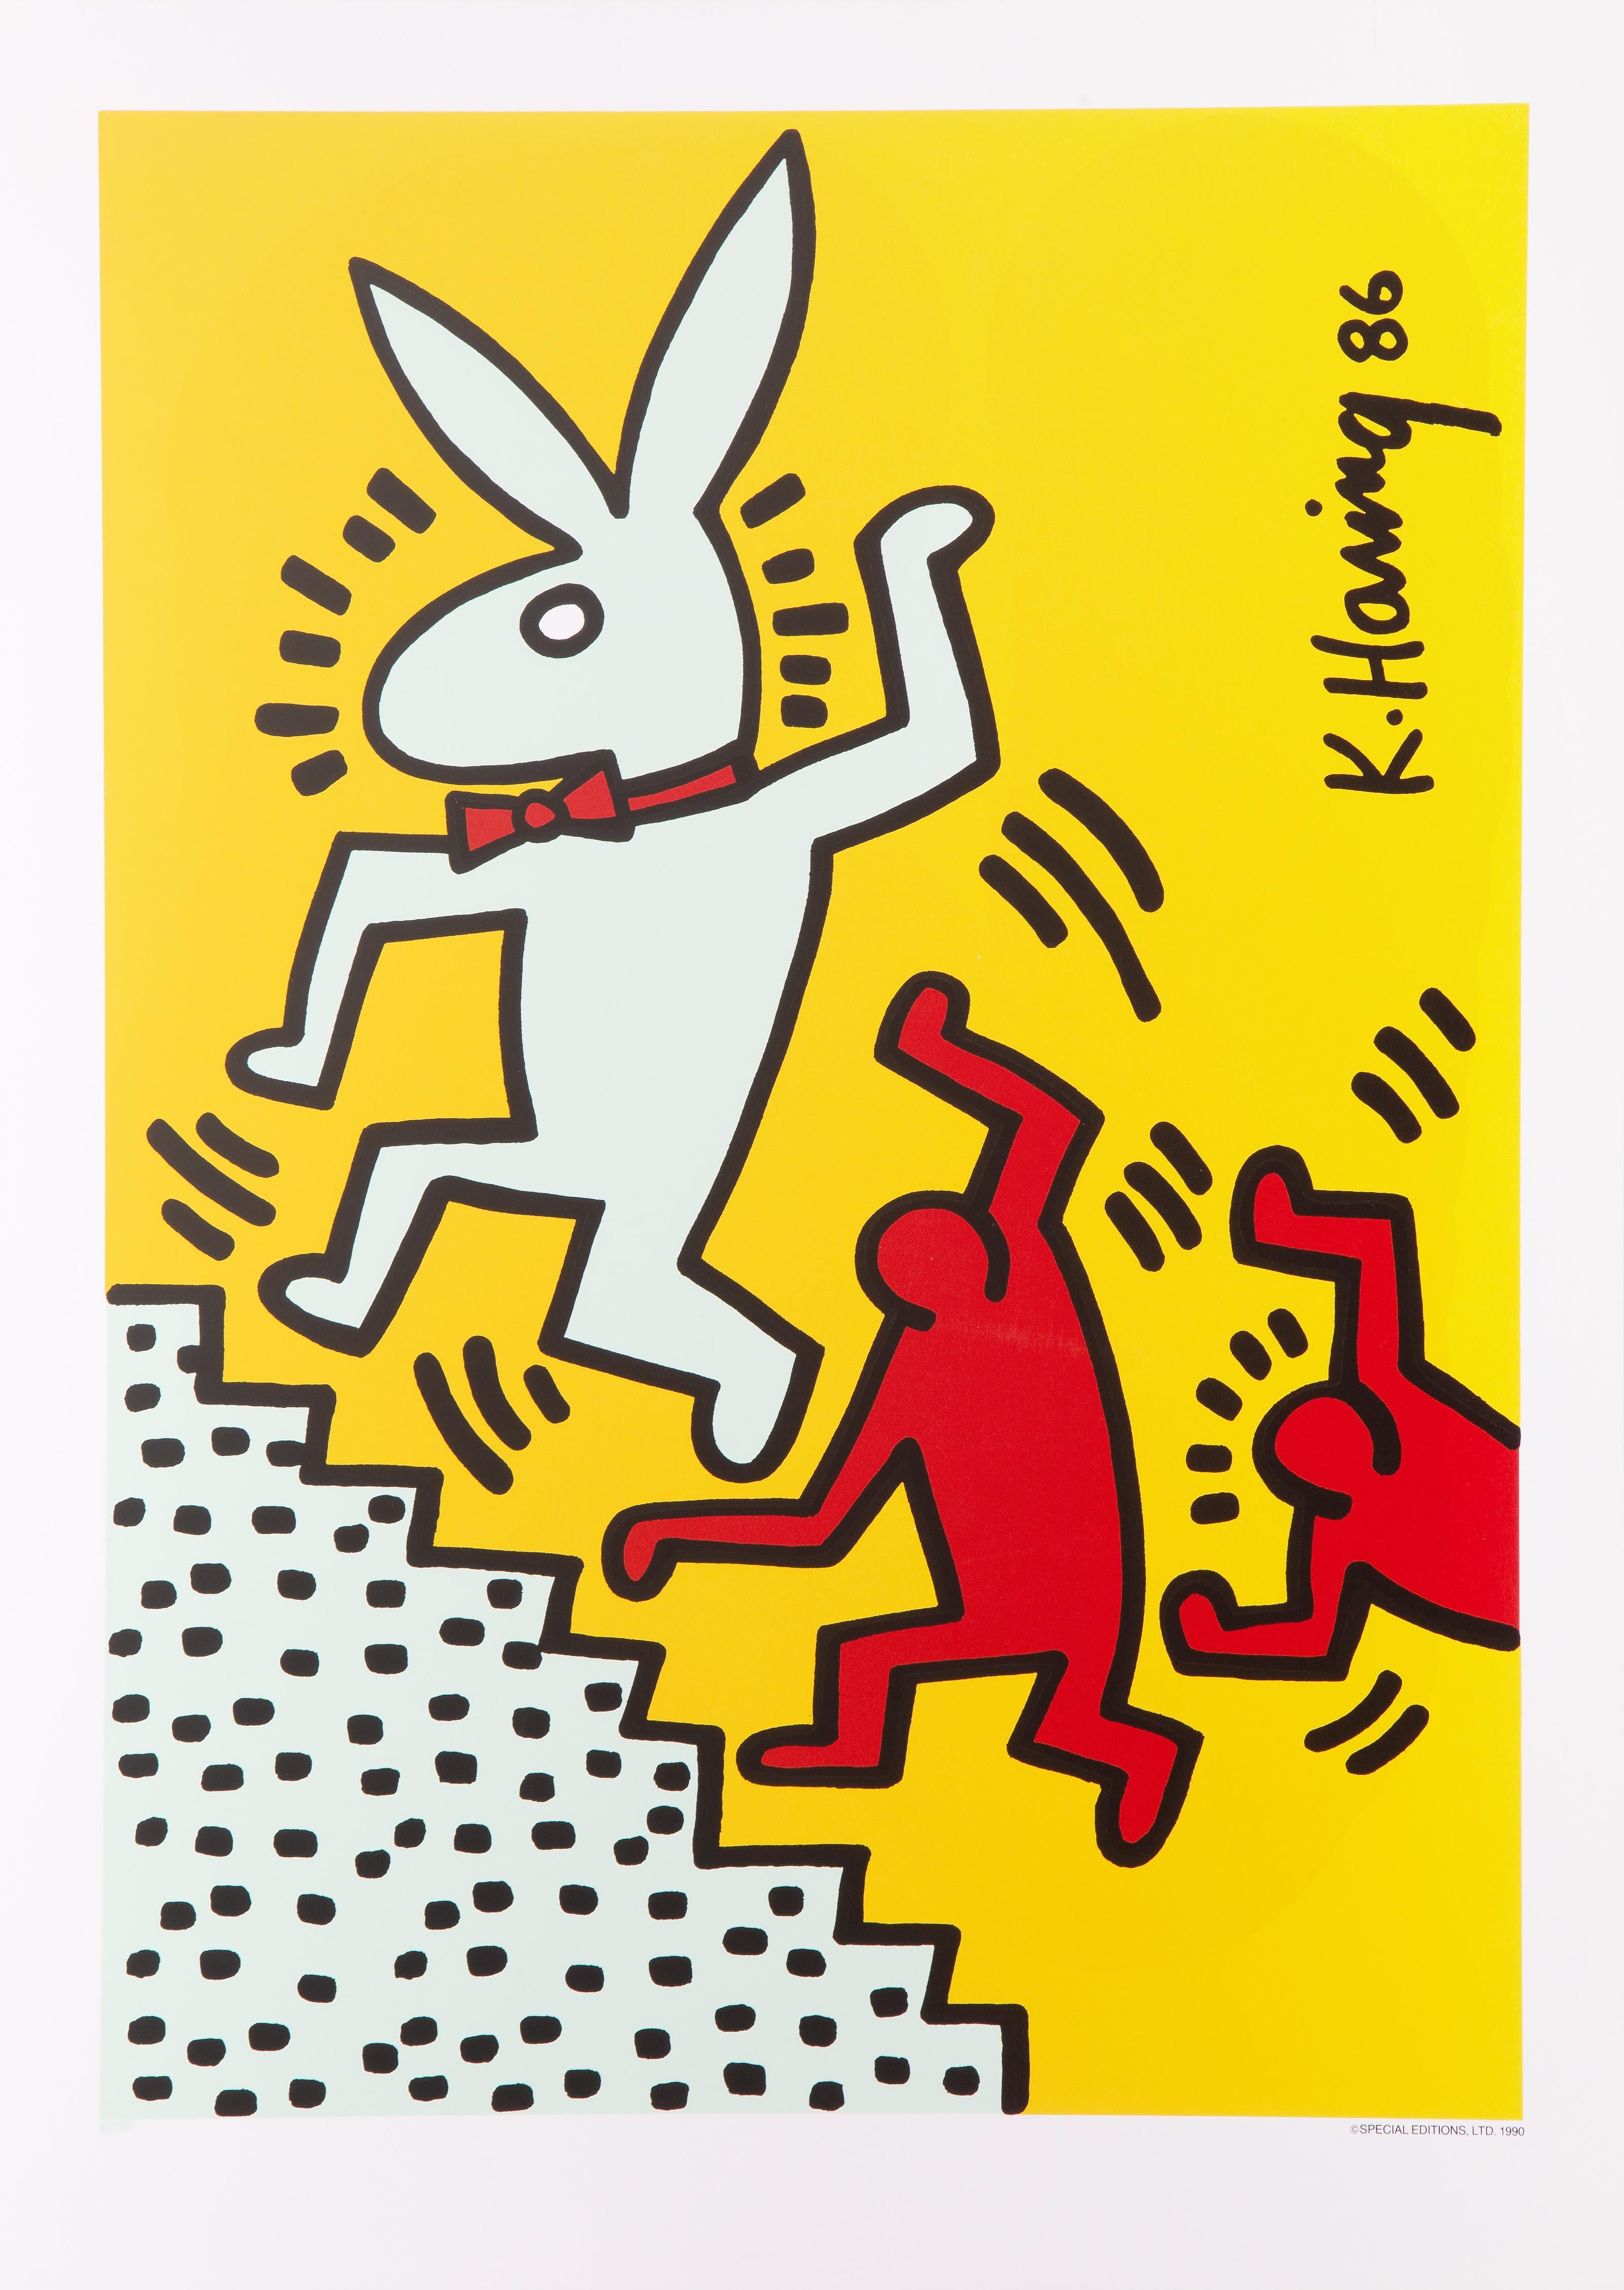 A limited edition silkscreen poster Keith Haring designed for Playboy. This limited edition run of 1000 was published in 1990 by Special Editions Ltd. The signature and date is in the printing. The sheet size is 32 x 23 inches and the Image size is